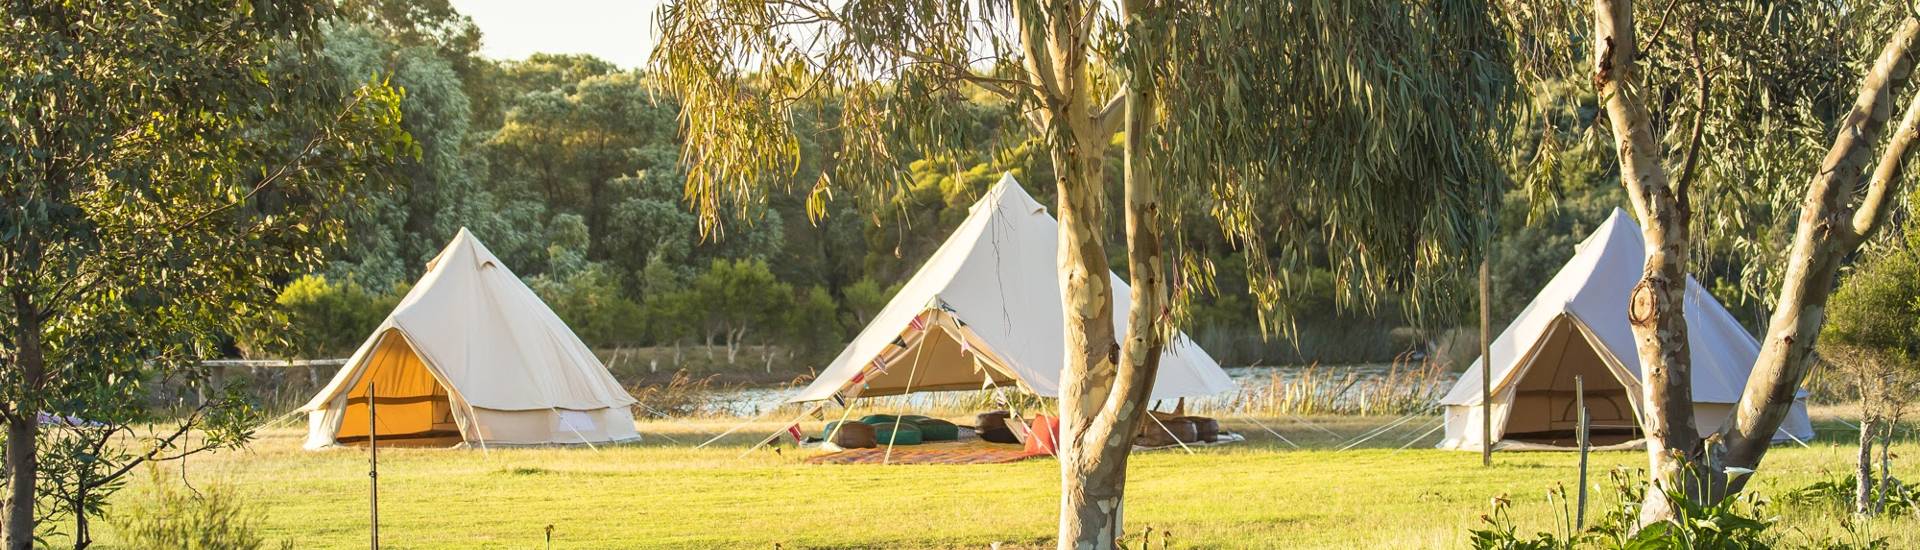 CanvasCamp | 100% Cotton Canvas Tents | Free Delivery